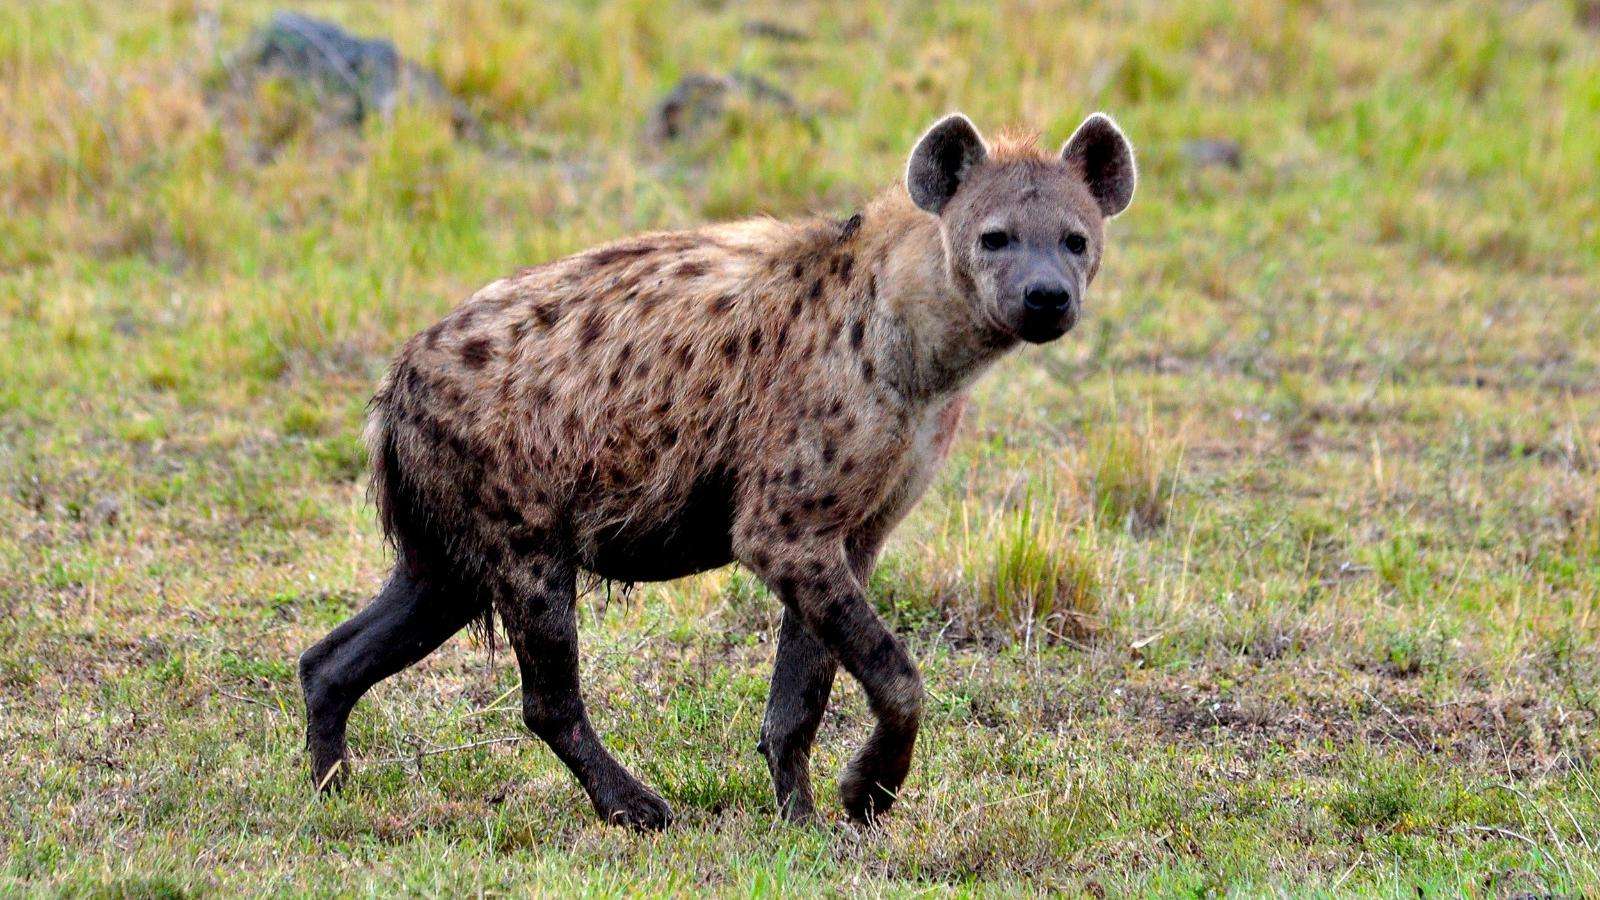 A pregnant hyena was pulled out by his brother, but it had no resistance. It was high-powered all the way.